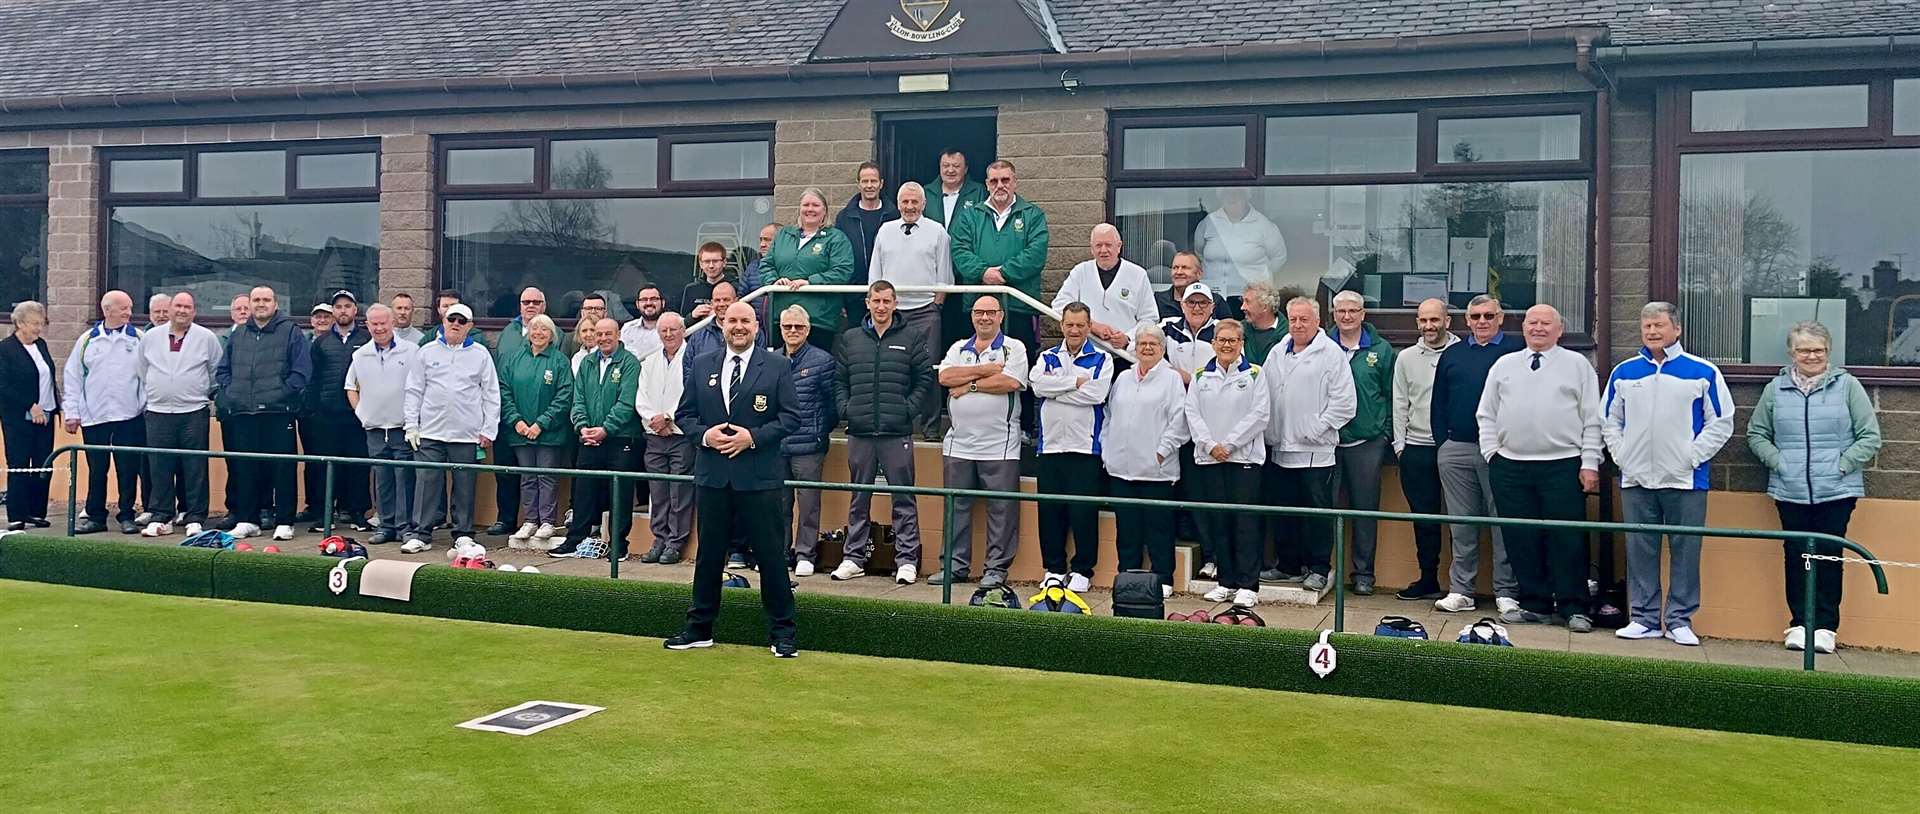 Ellon Bowling Club welcomed members and guests to the opening of the season.